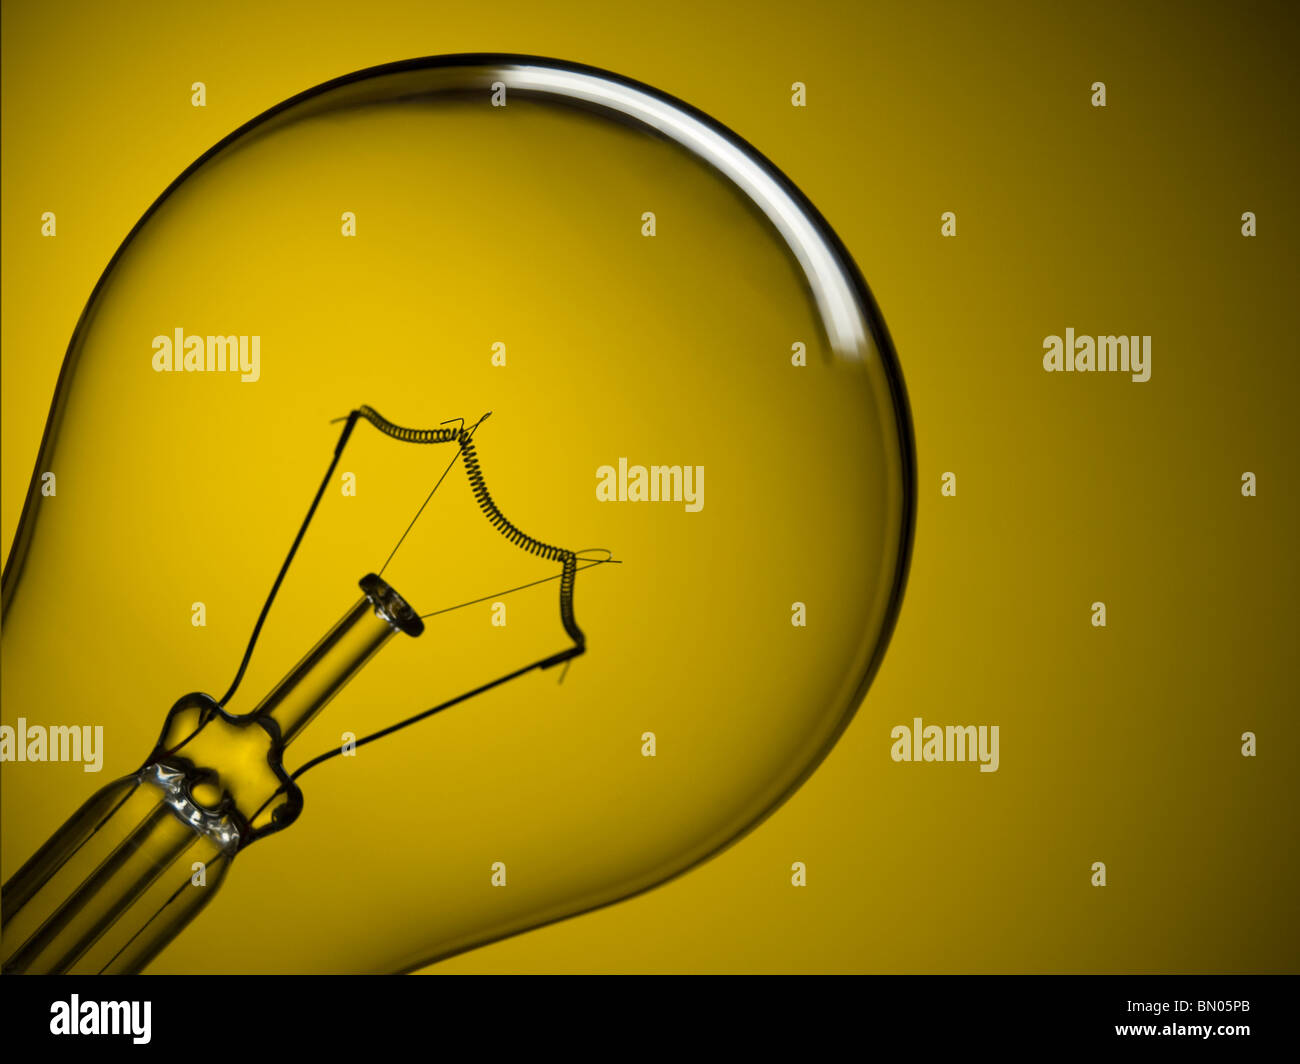 Close up on a transparent light bulb over a yellow background. Stock Photo